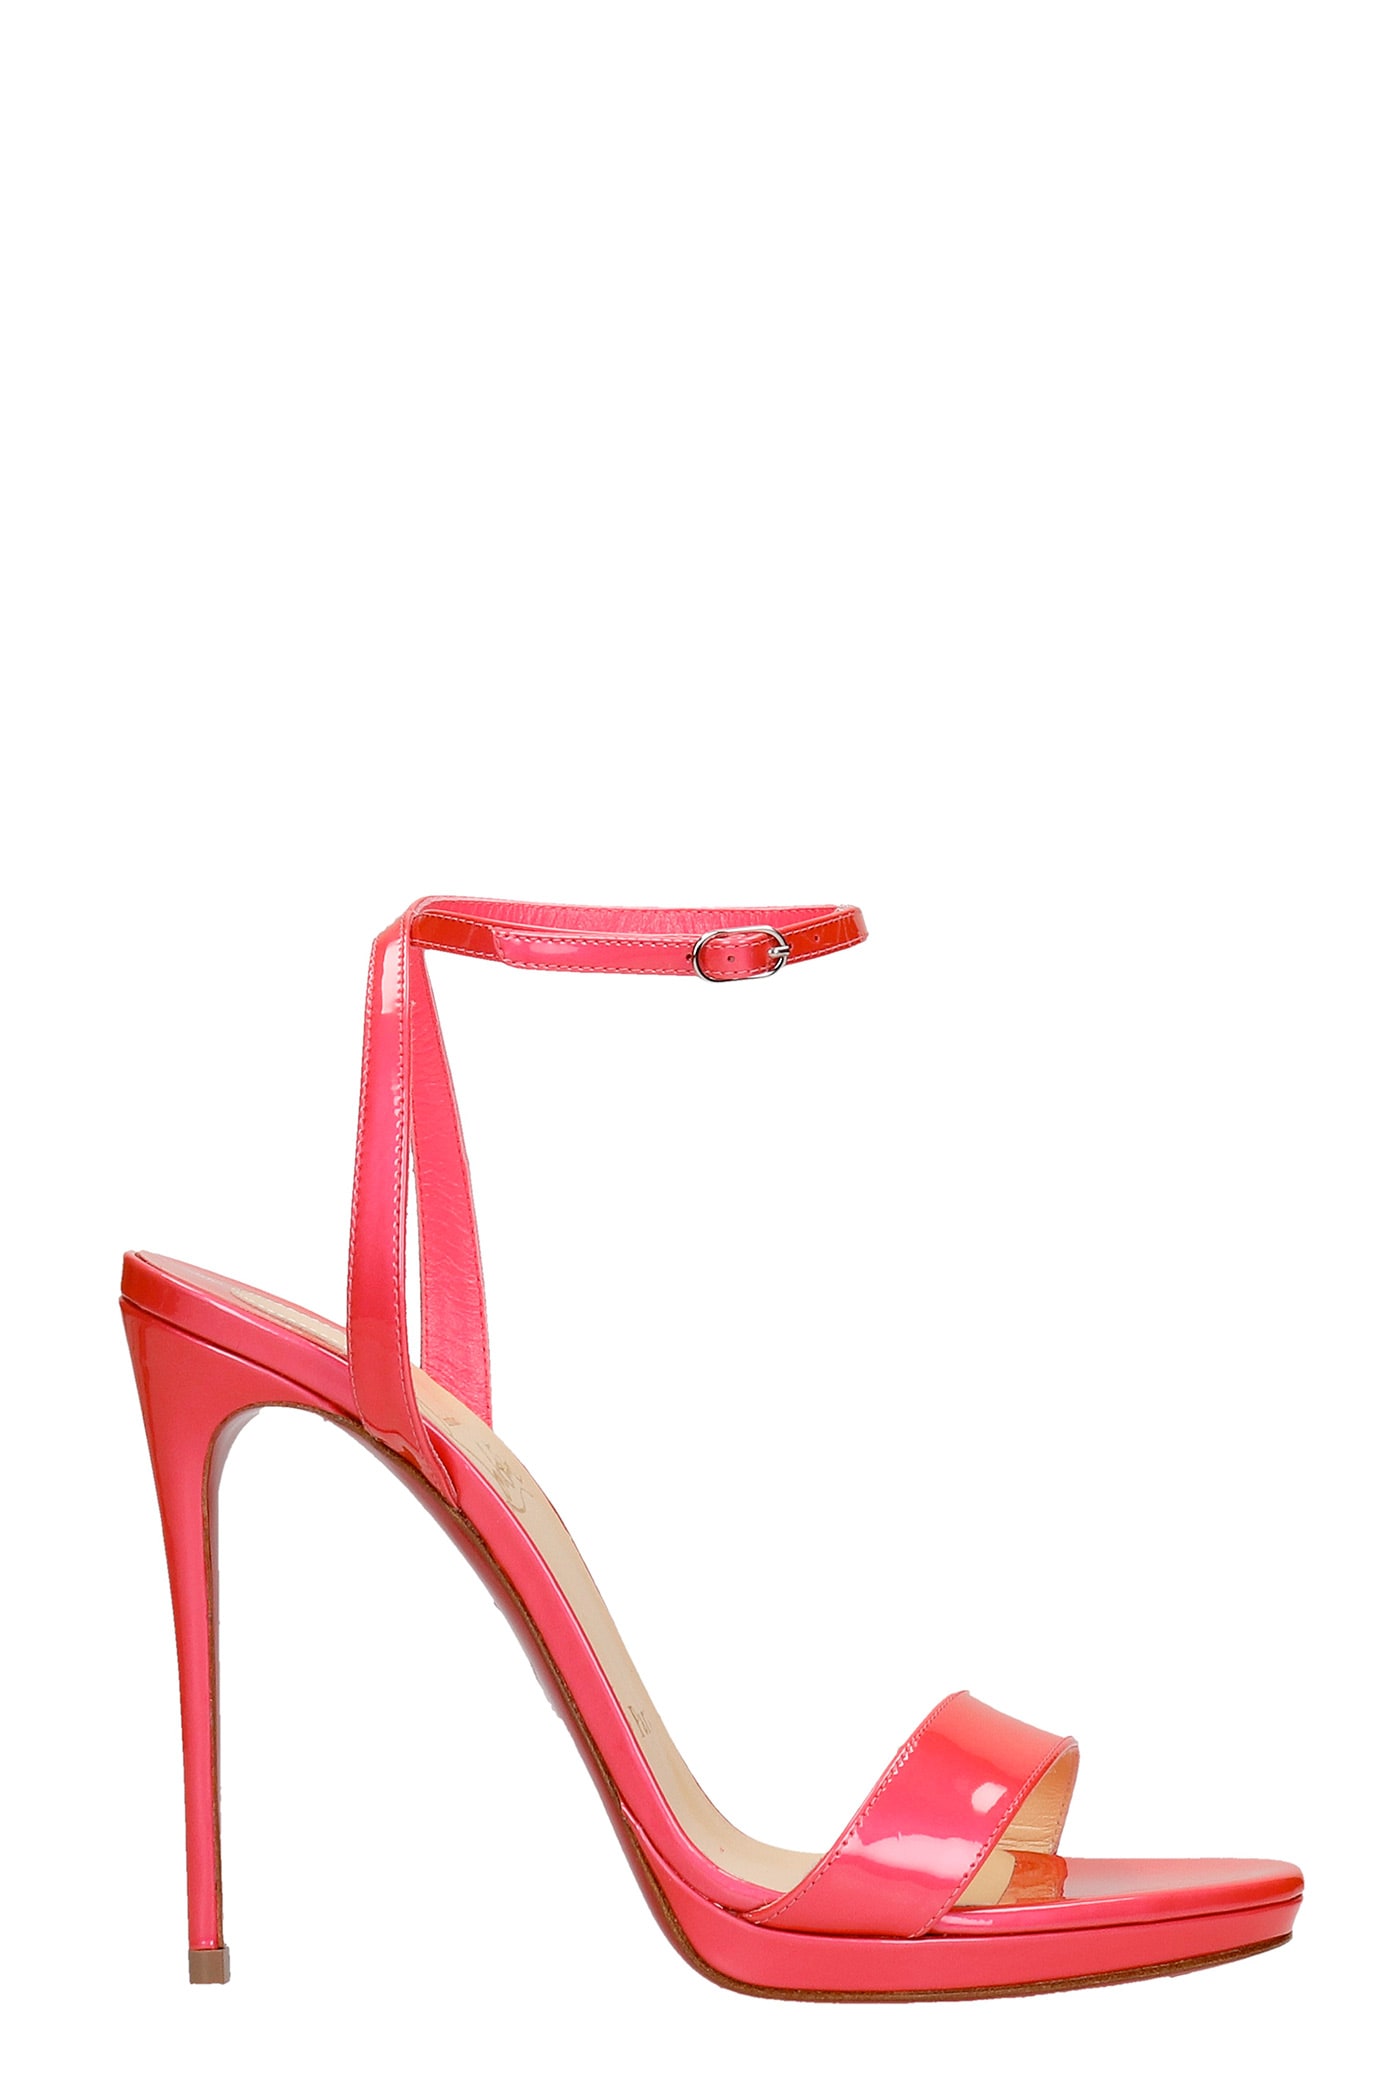 Christian Louboutin Loubi Queen 120 Sandals In Rose-pink Patent Leather